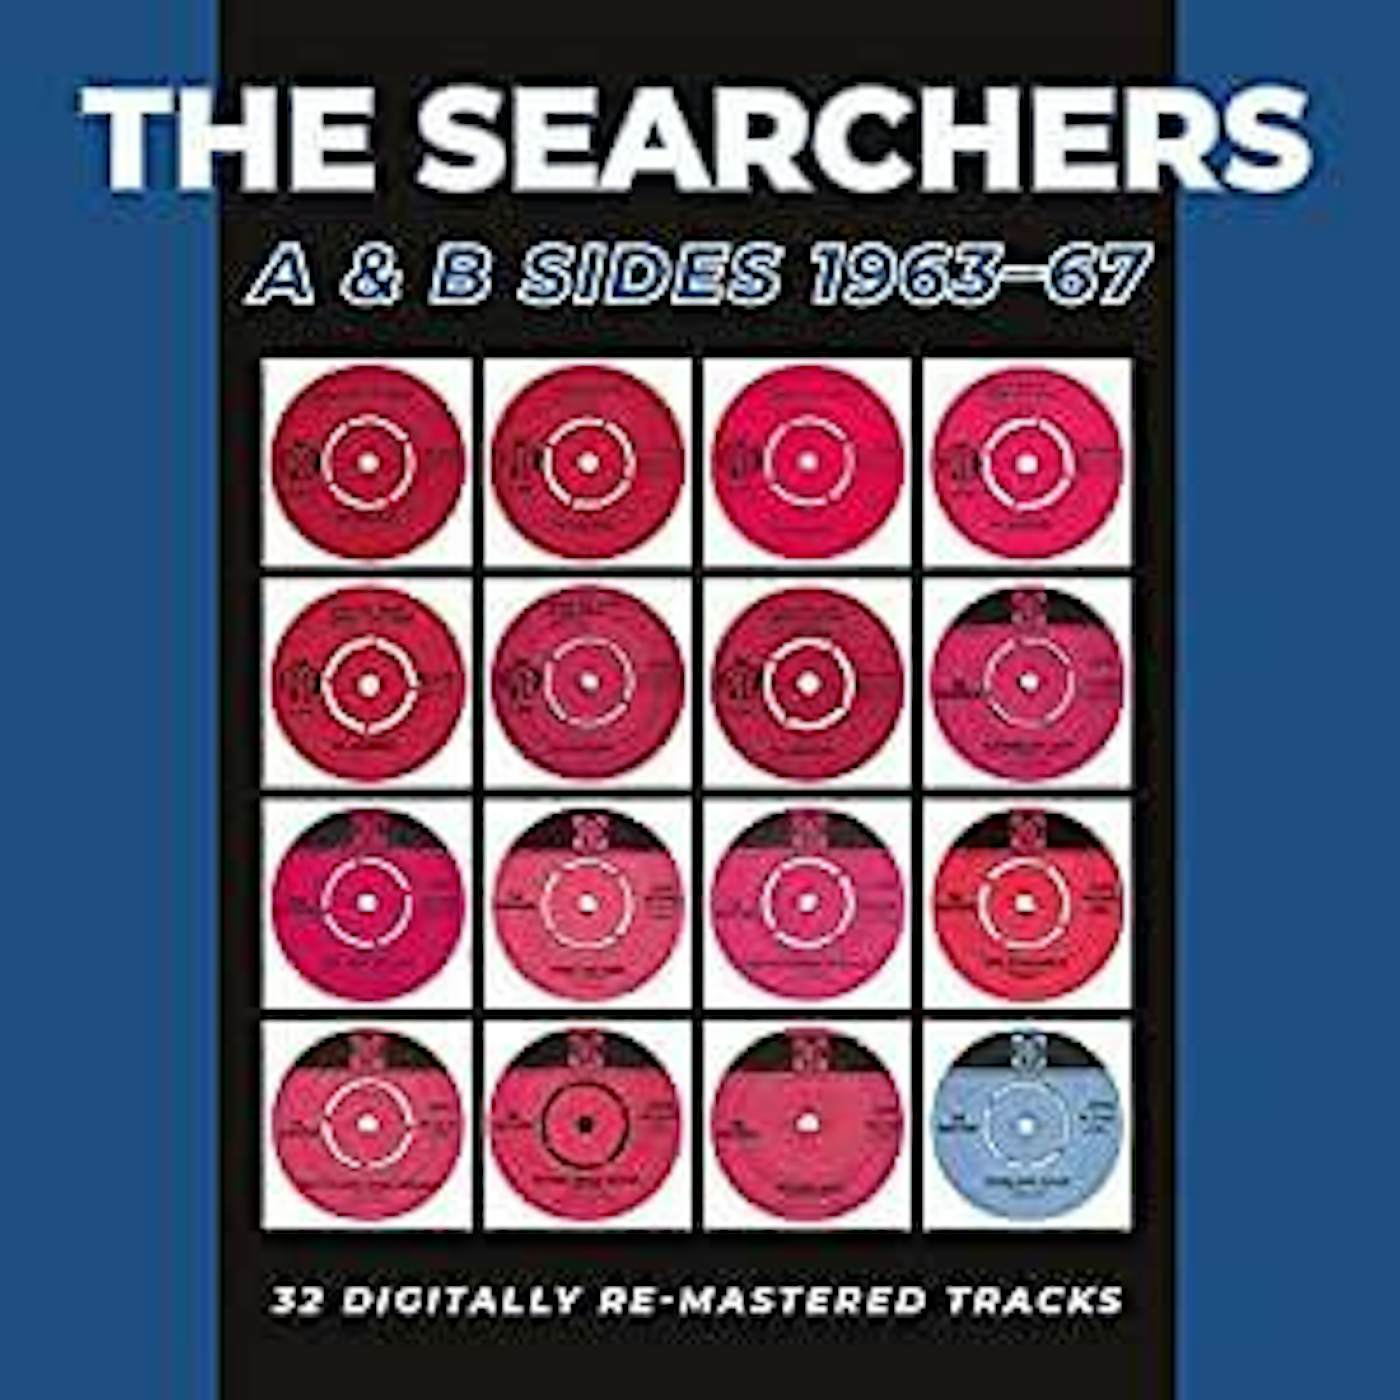 The Searchers A & B SIDES 1963-67 CD